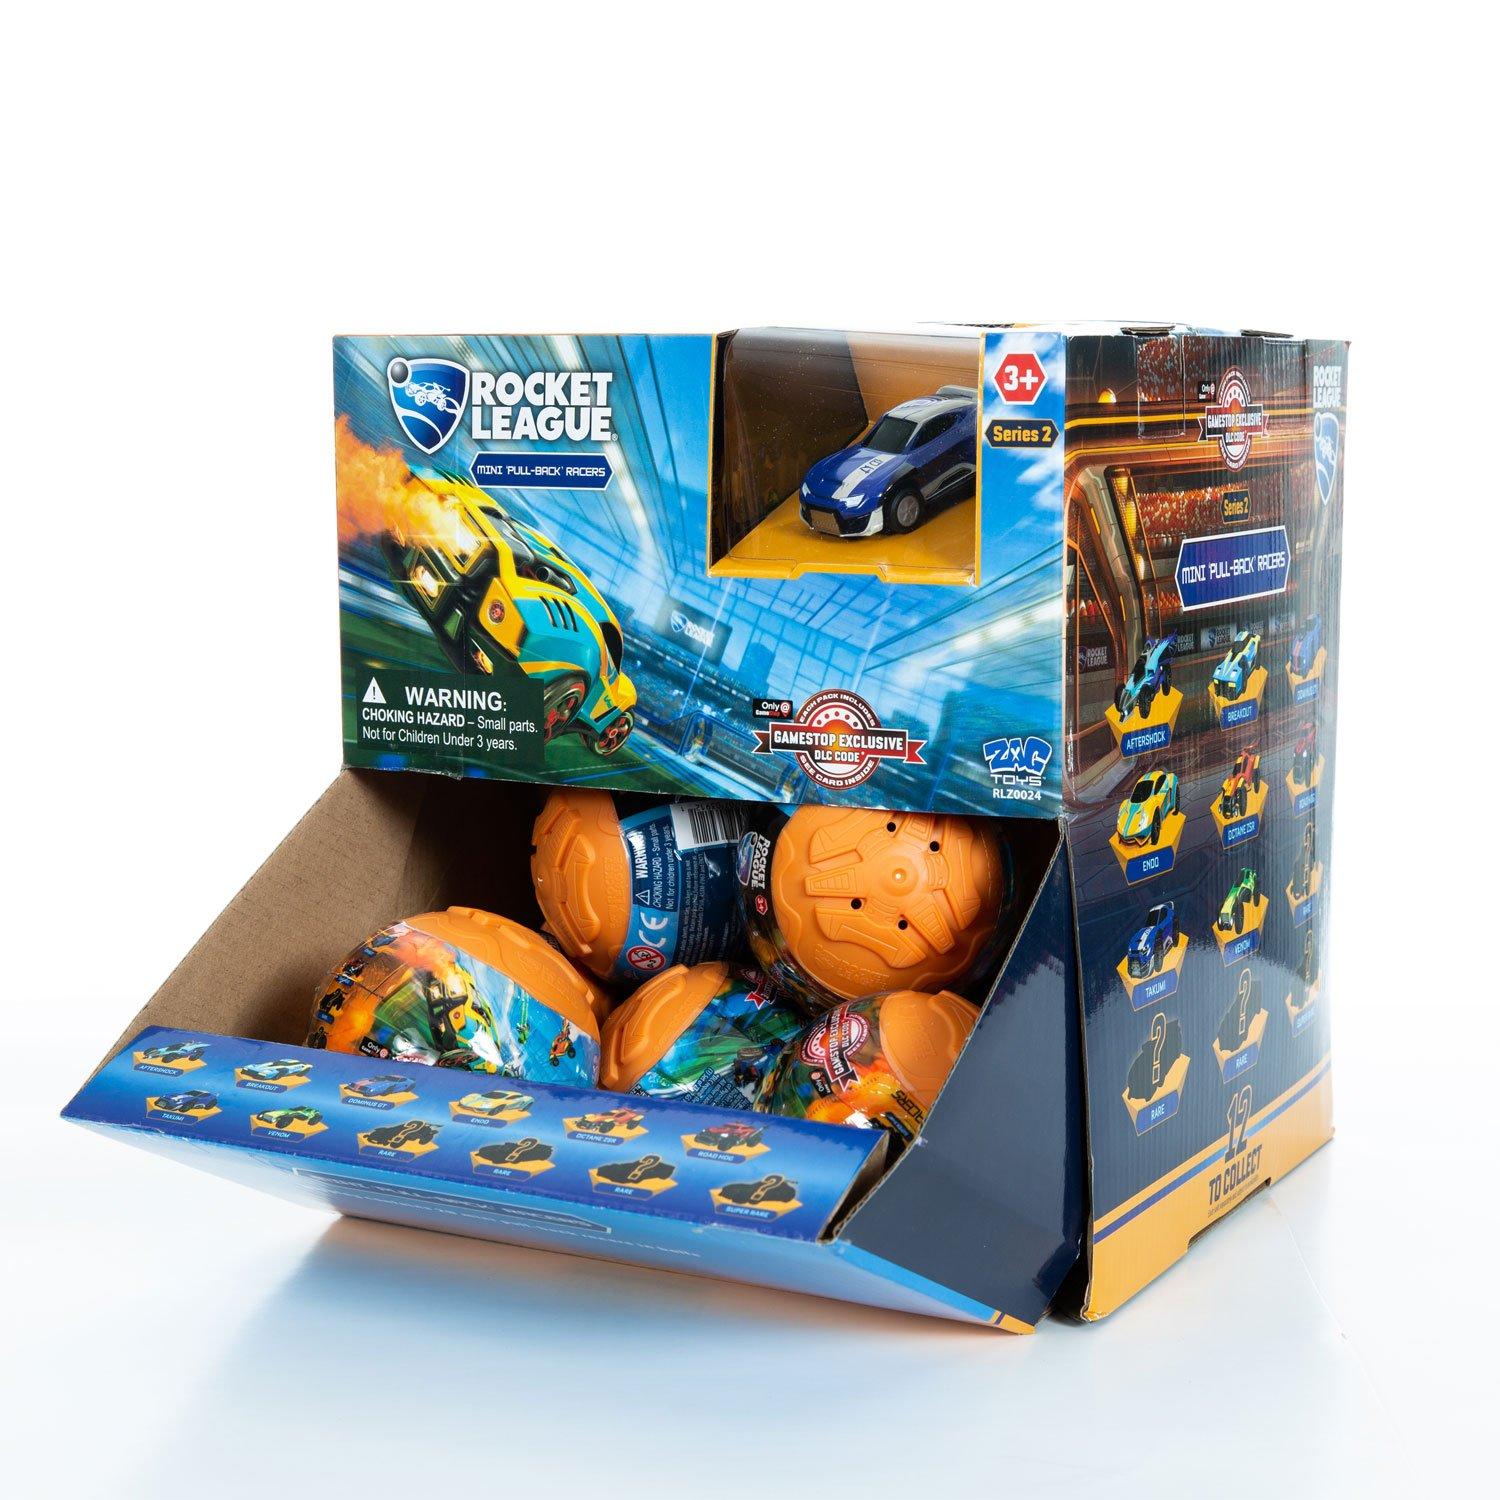 Rocket League Series 2 Blind Bag Battle Car Only At Gamestop Gamestop - roblox blind boxes series 2 code items surprise mystery boxes